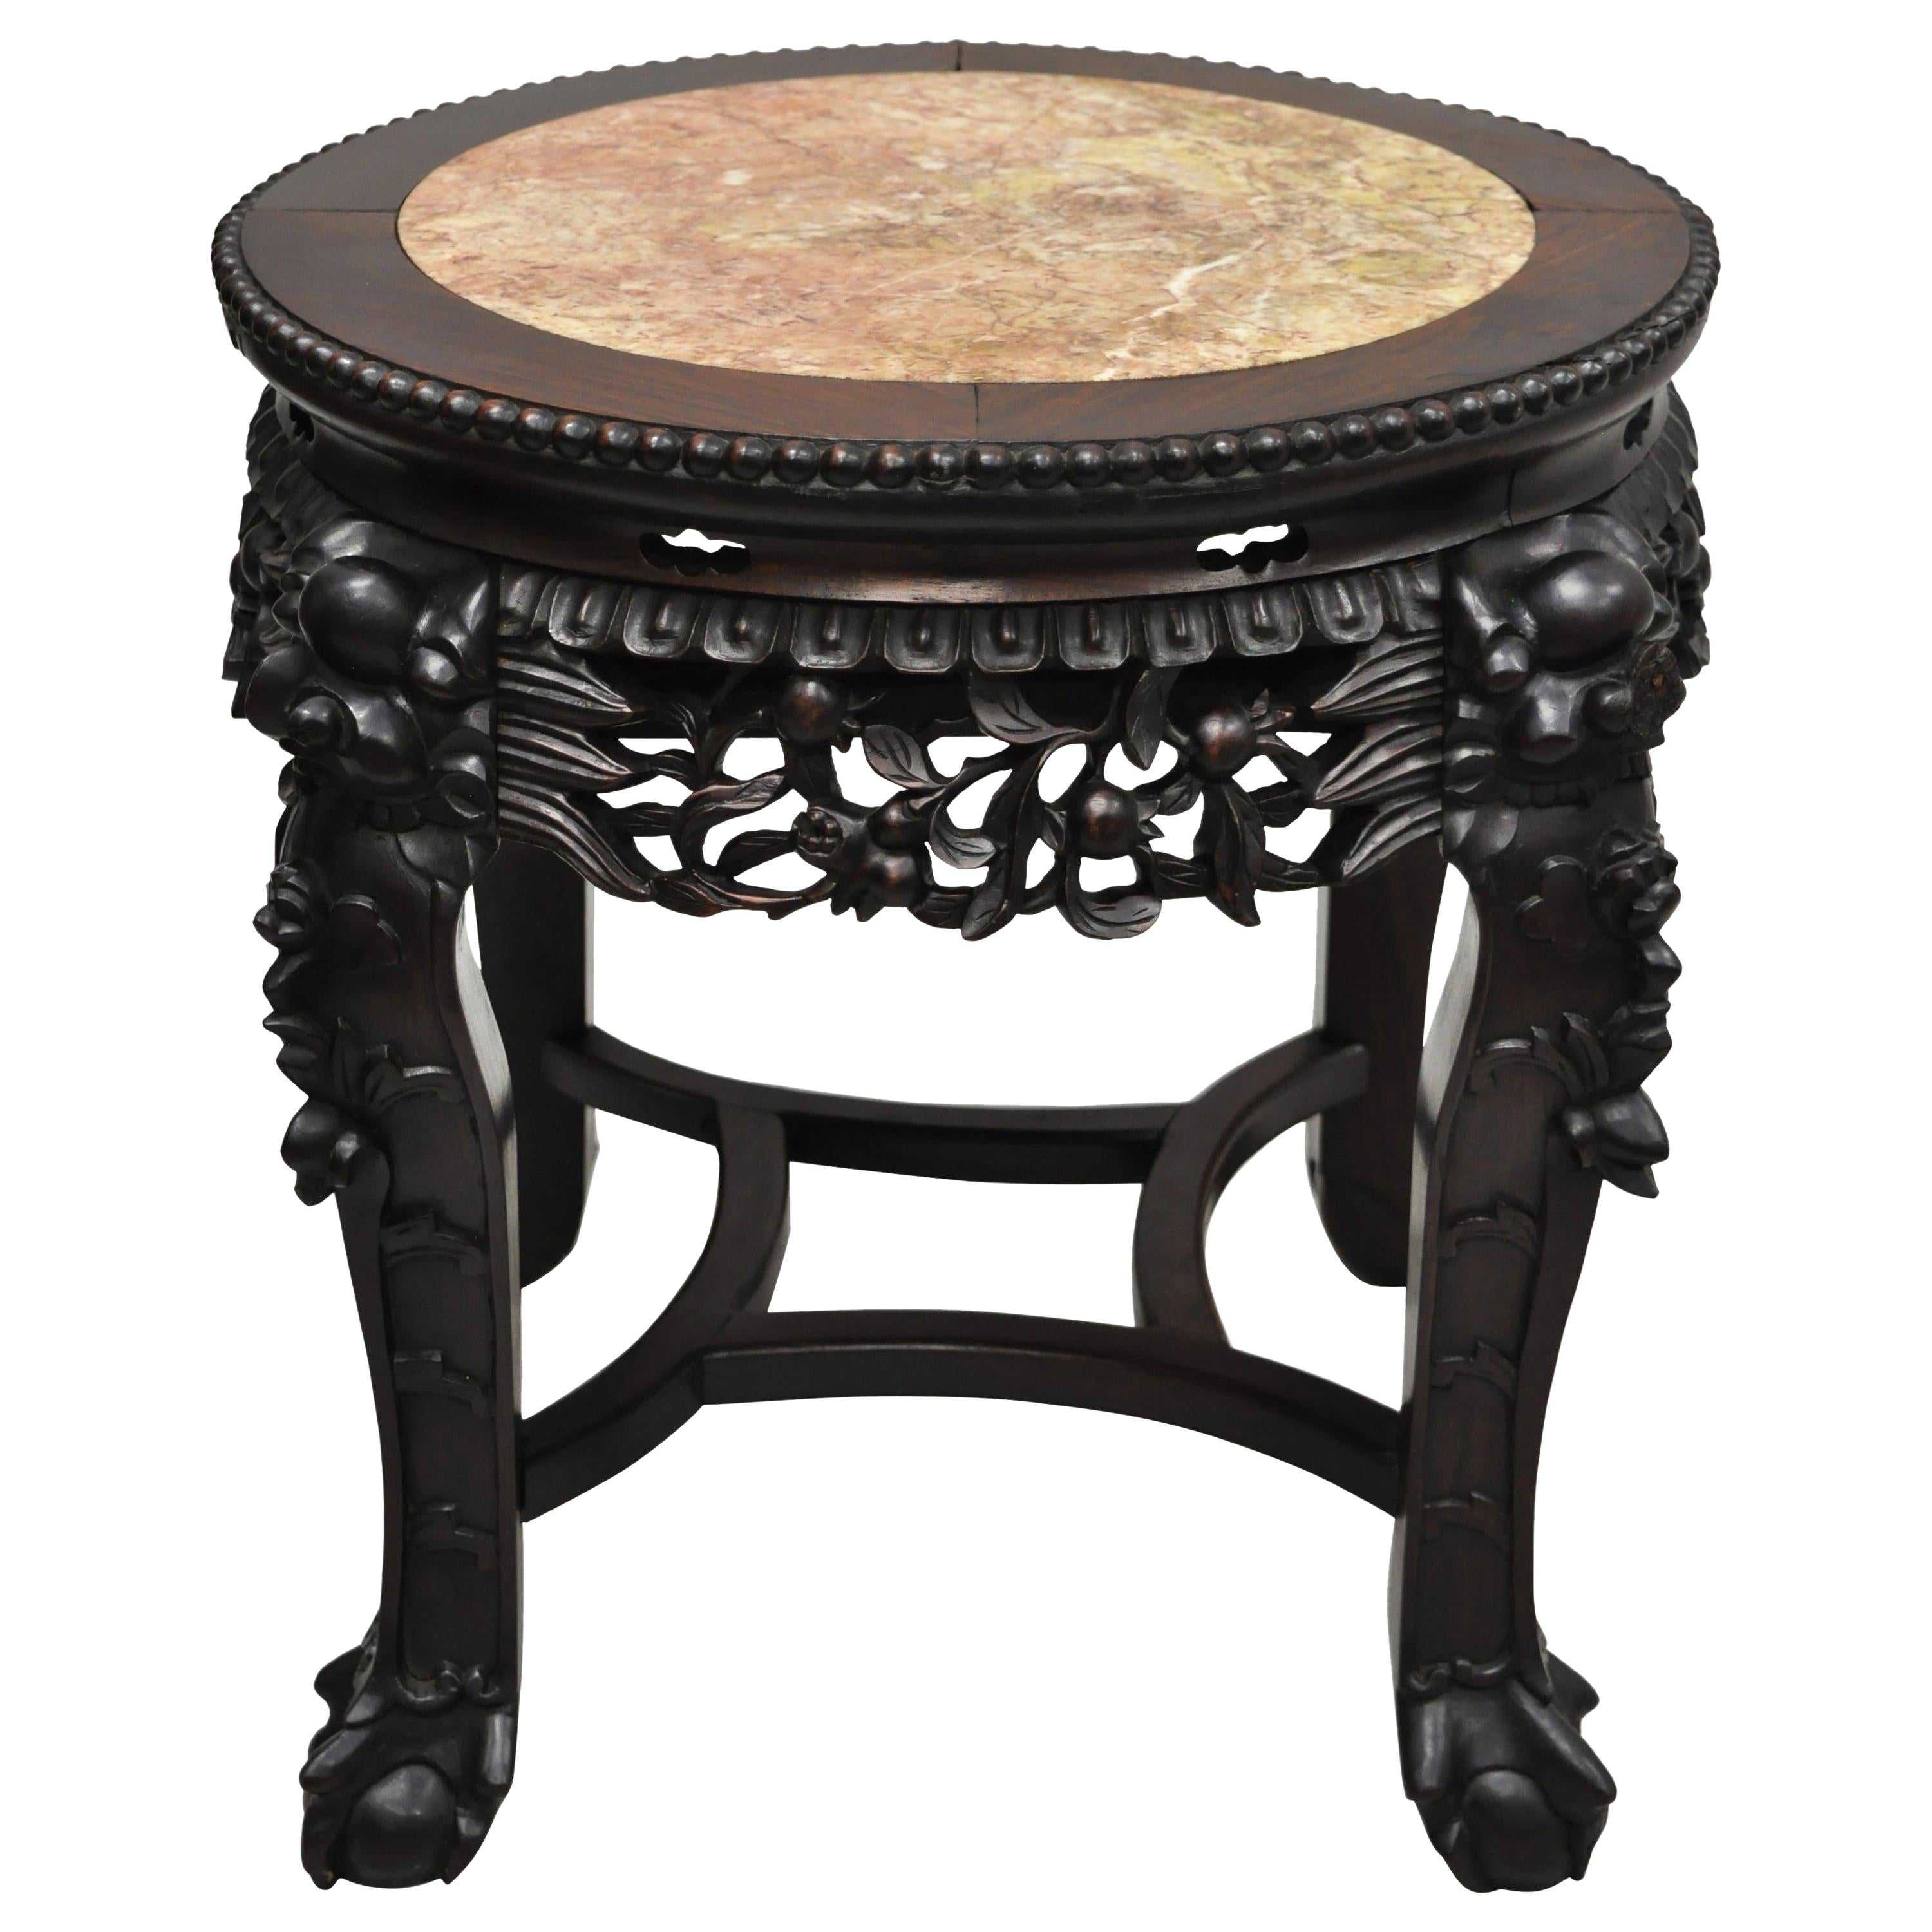 Antique Carved Hardwood Rosewood Marble-Top Chinese Pedestal Table Plant Stand B